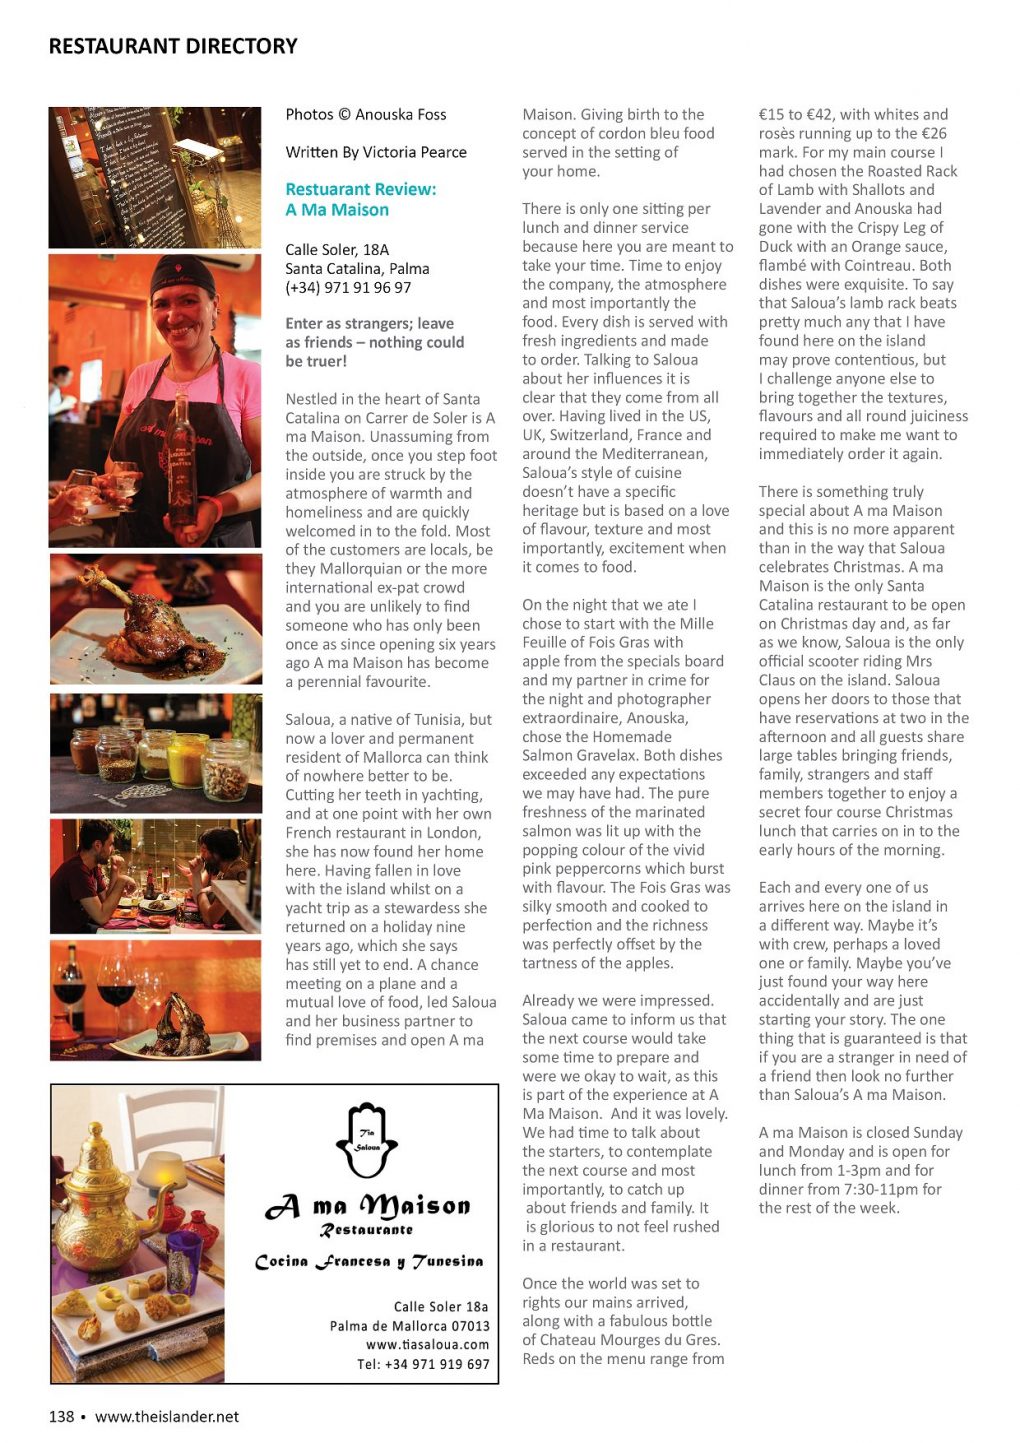 A ma Maison review published in The Islander Magazine Interview by Victoria Pearce